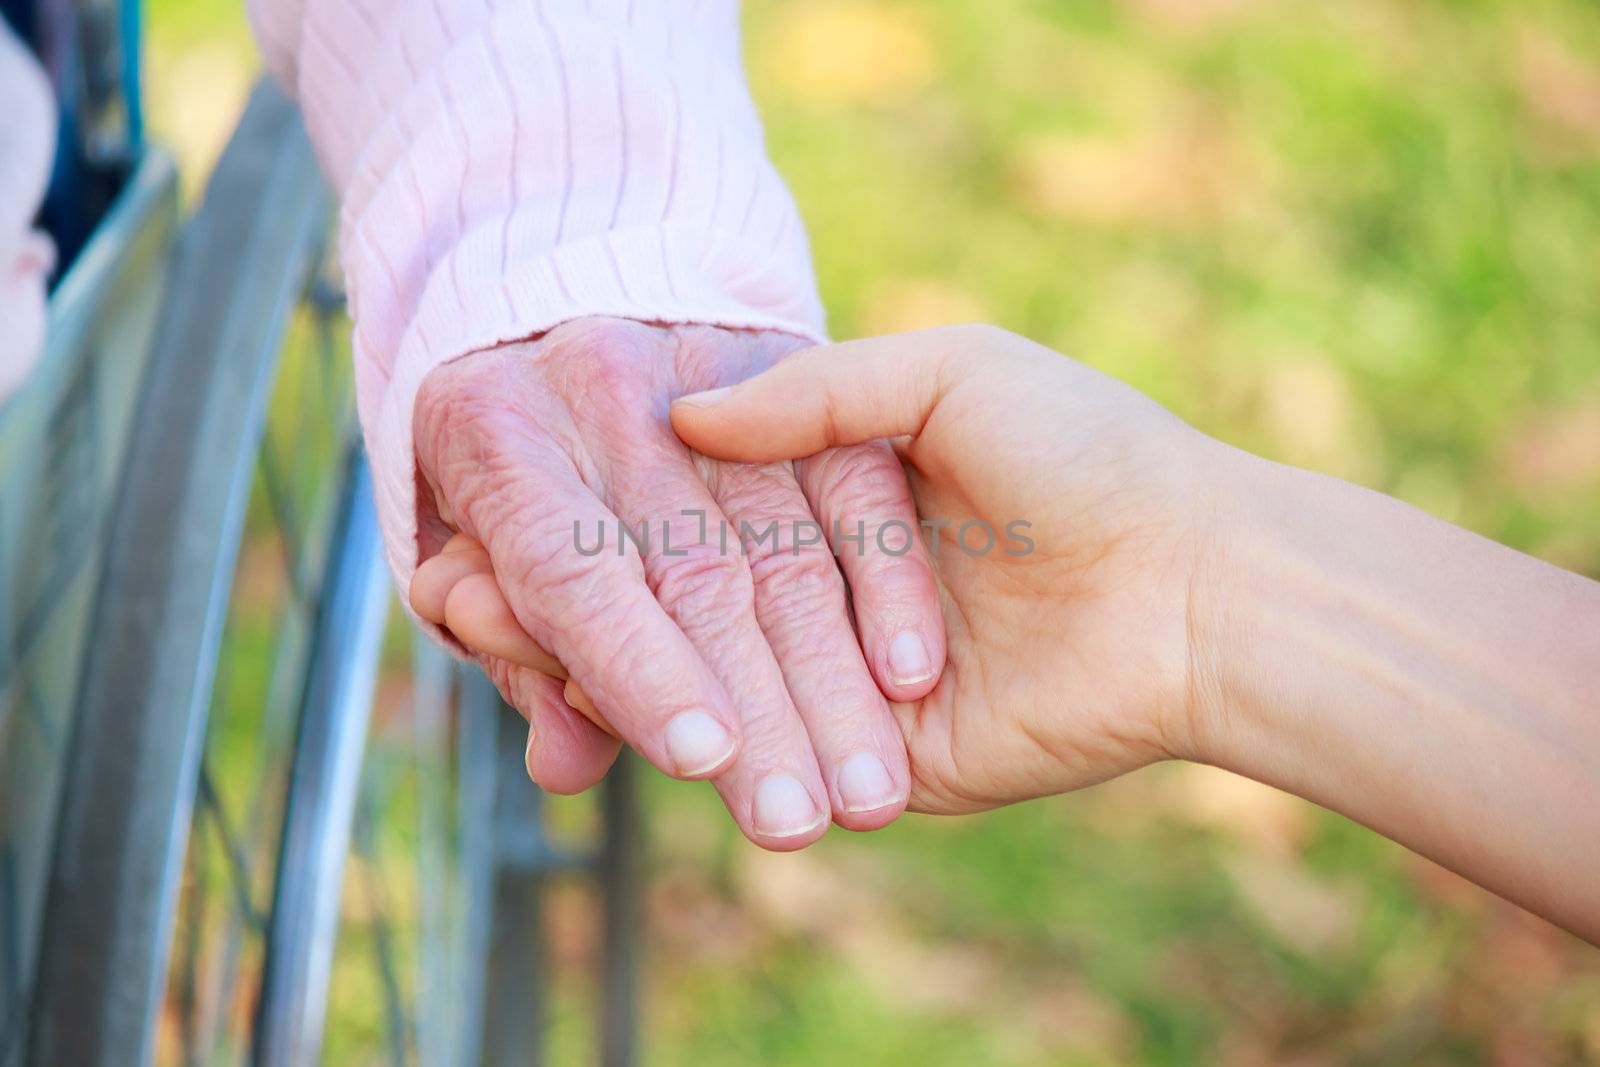 Senior Lady in Wheelchair Holding Hands with a Young Caretaker or Loved-one